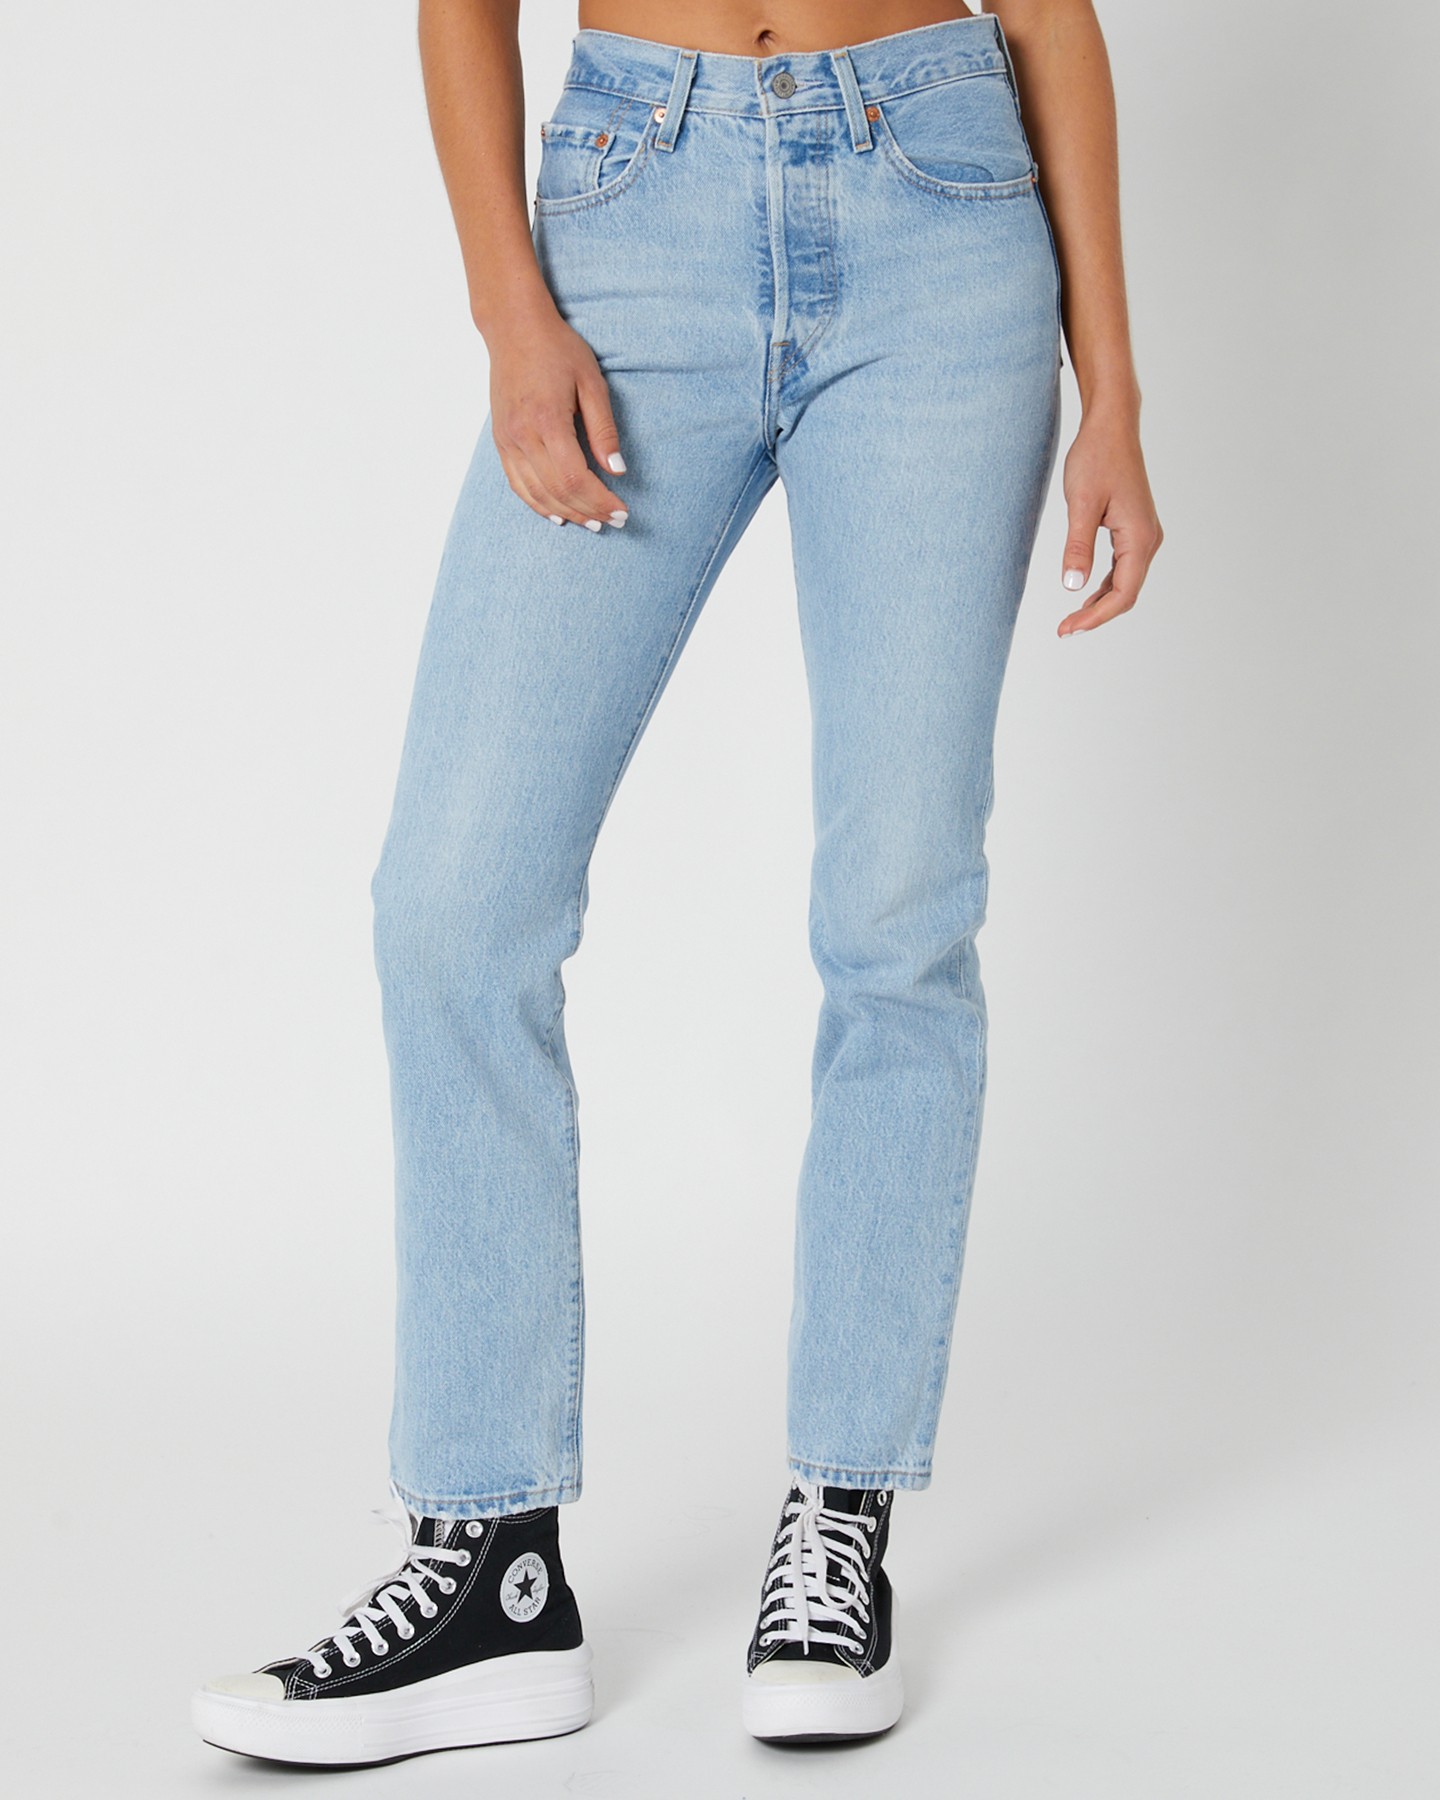 https://www.surfstitch.com/on/demandware.static/-/Sites-ss-master-catalog/default/dw44260fa6/images/12501-0373/LUXOR-LAST-WOMENS-CLOTHING-LEVIS-JEANS-12501-0373_1.JPG